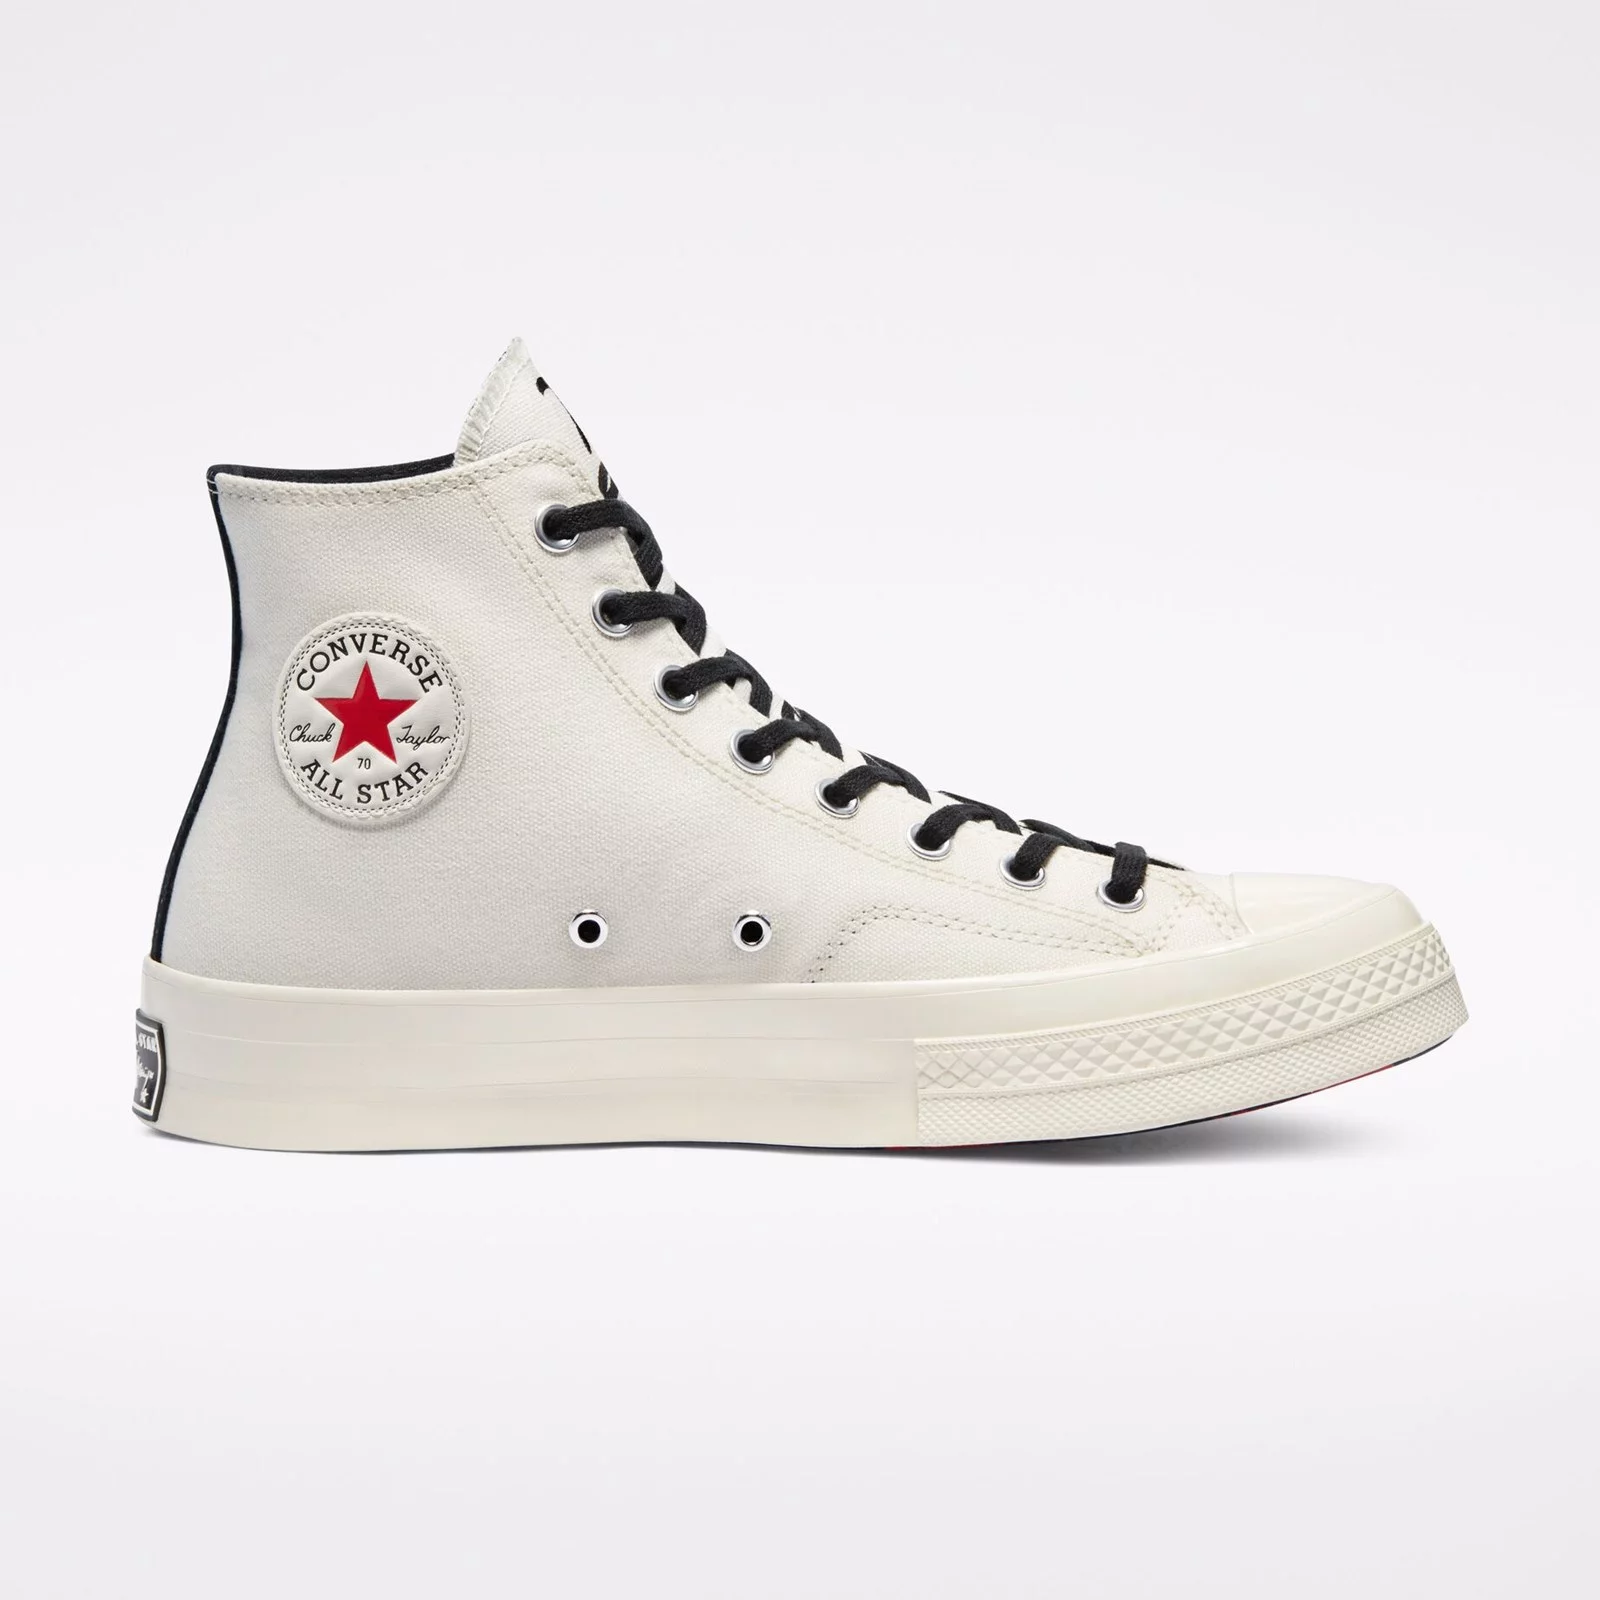 Sneakers Converse x Keith Haring Chuck 70 High Top Egret/Black/Red 171858C